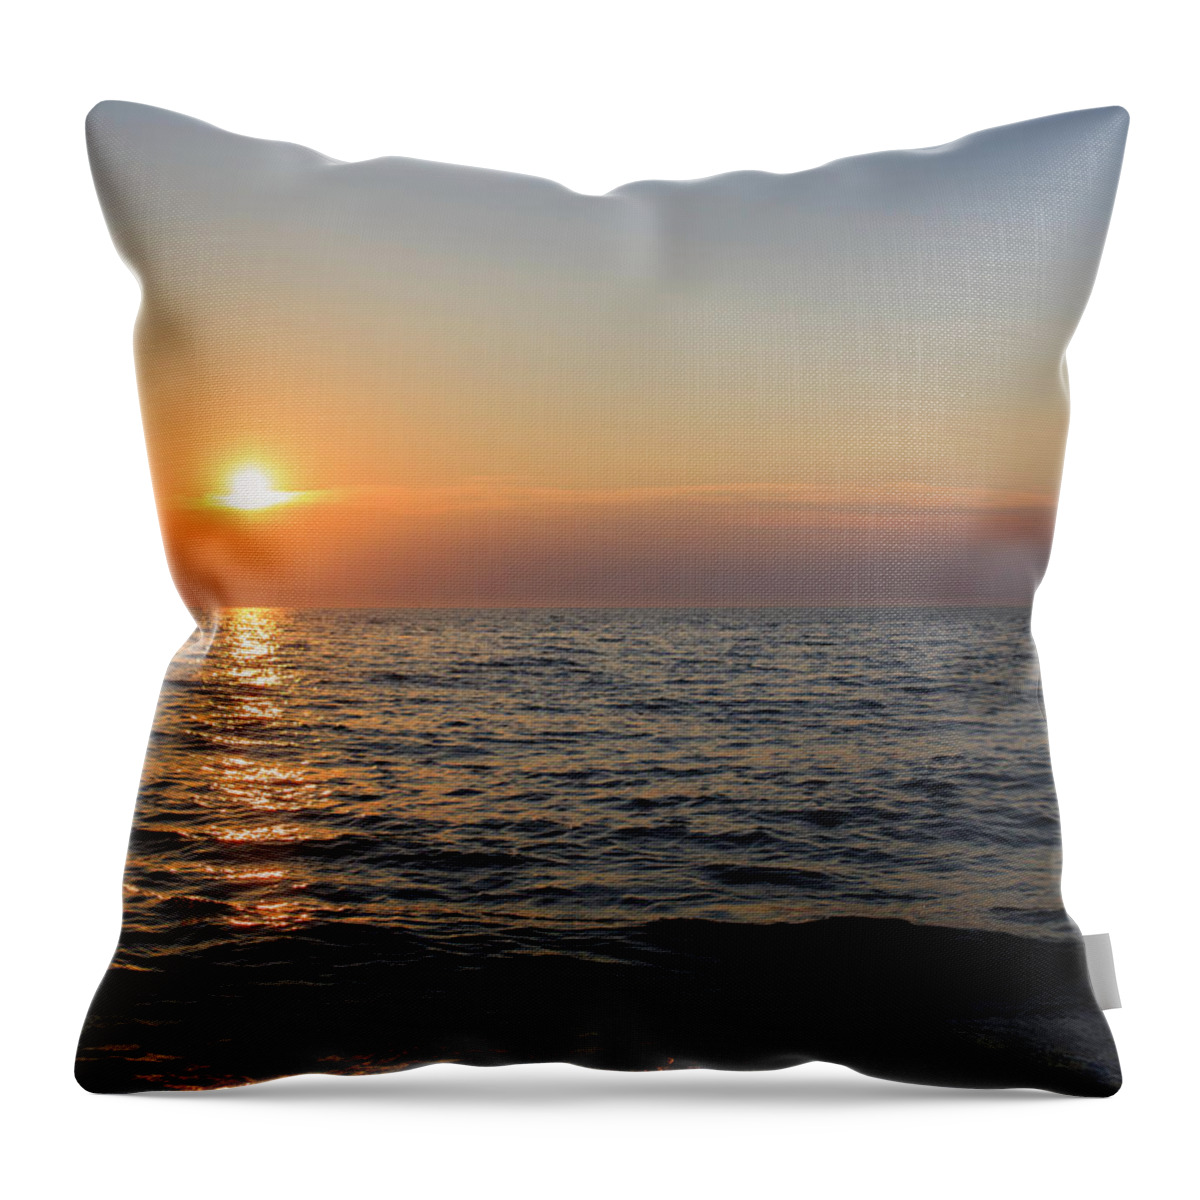 Scenics Throw Pillow featuring the photograph Beautiful Evening Sunset Over Sea by Republica